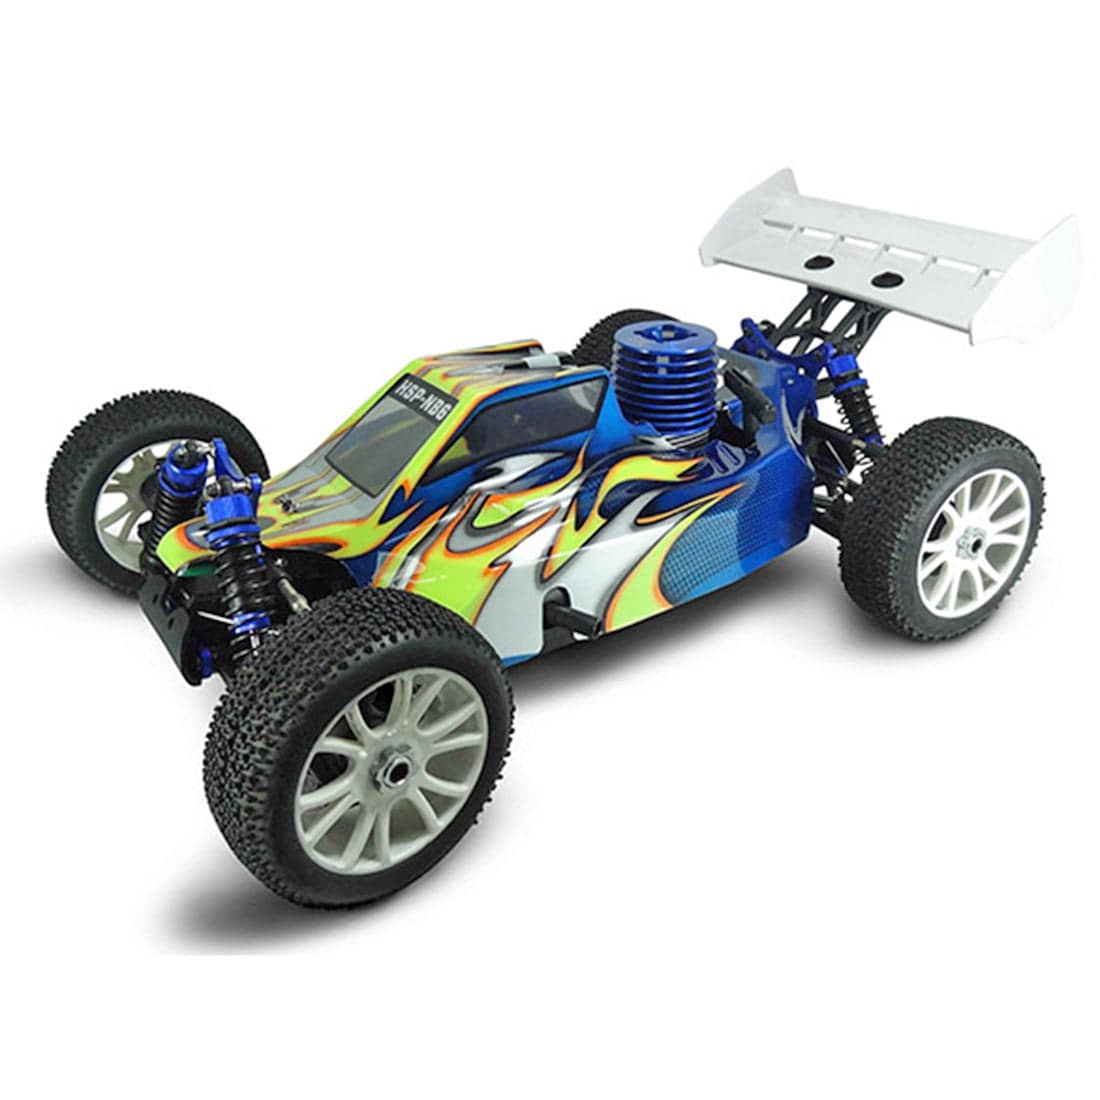 Airco agentschap Veronderstelling HSP 94970 1/8 2.4Ghz 4WD Gas Powered RC Car Off-road Vehicle Model RTR with  26CXP Nitro Engine 70-80 km/H - Stirlingkit